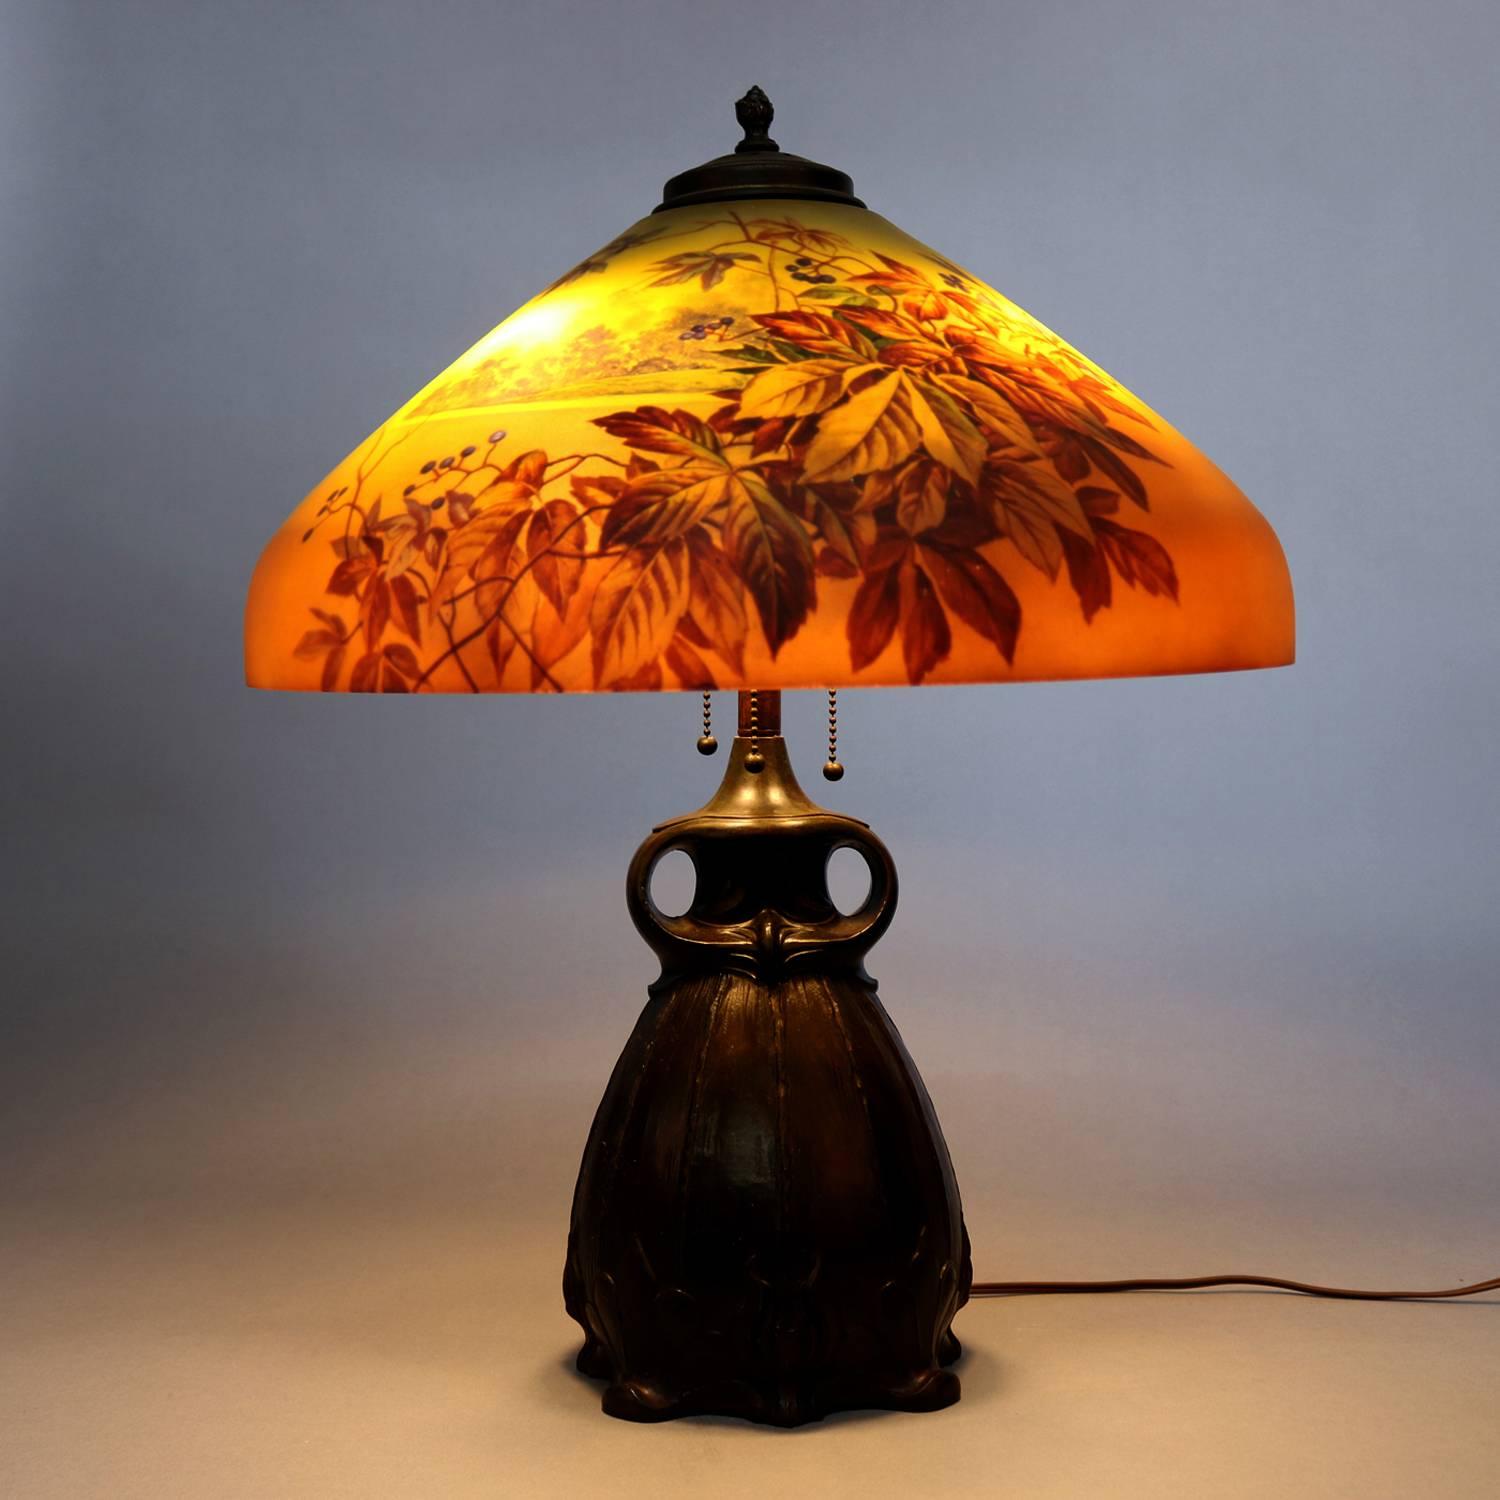 Antique Arts & Crafts table lamp by Handel features double hand vessel form cast base with three lights and Pittsburgh School reverse painted shade depicting lake scene and foliate overlay, handel lamps label on base, circa 1920.

Measures: 24